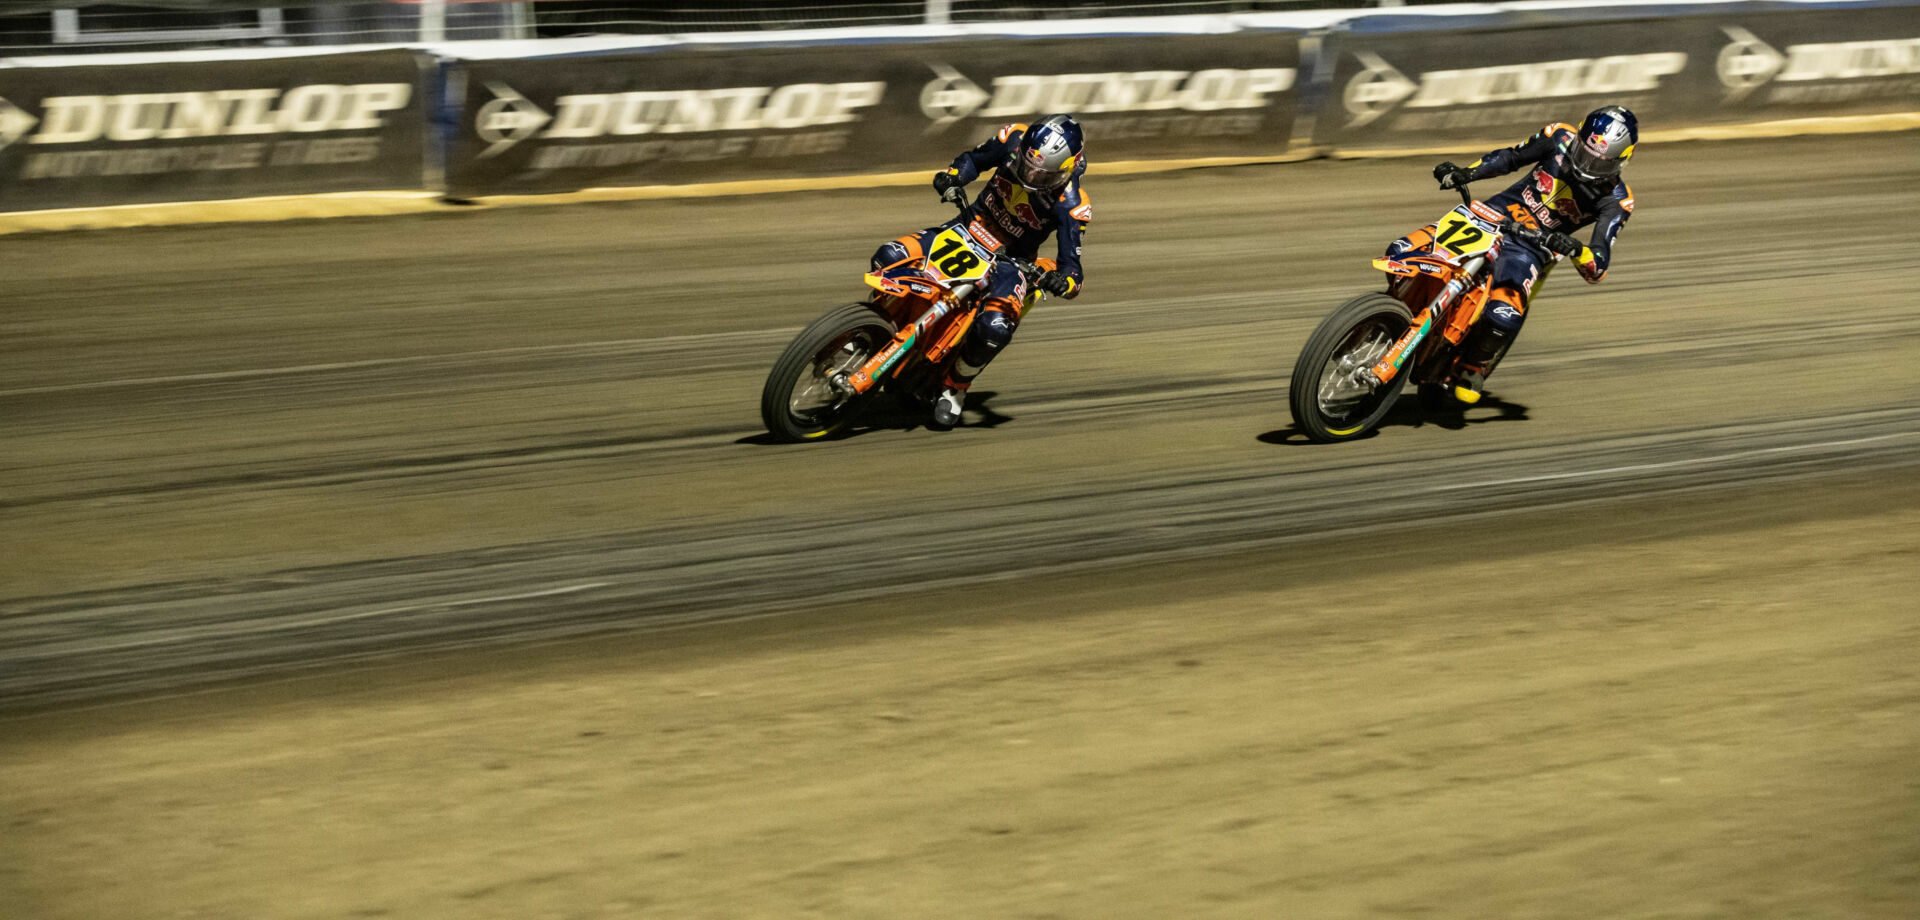 Red Bull KTM factory riders Kody Kopp (12) and Max Whale (18) at the Black Hills Half-Mile. Photo courtesy KTM Factory Racing.